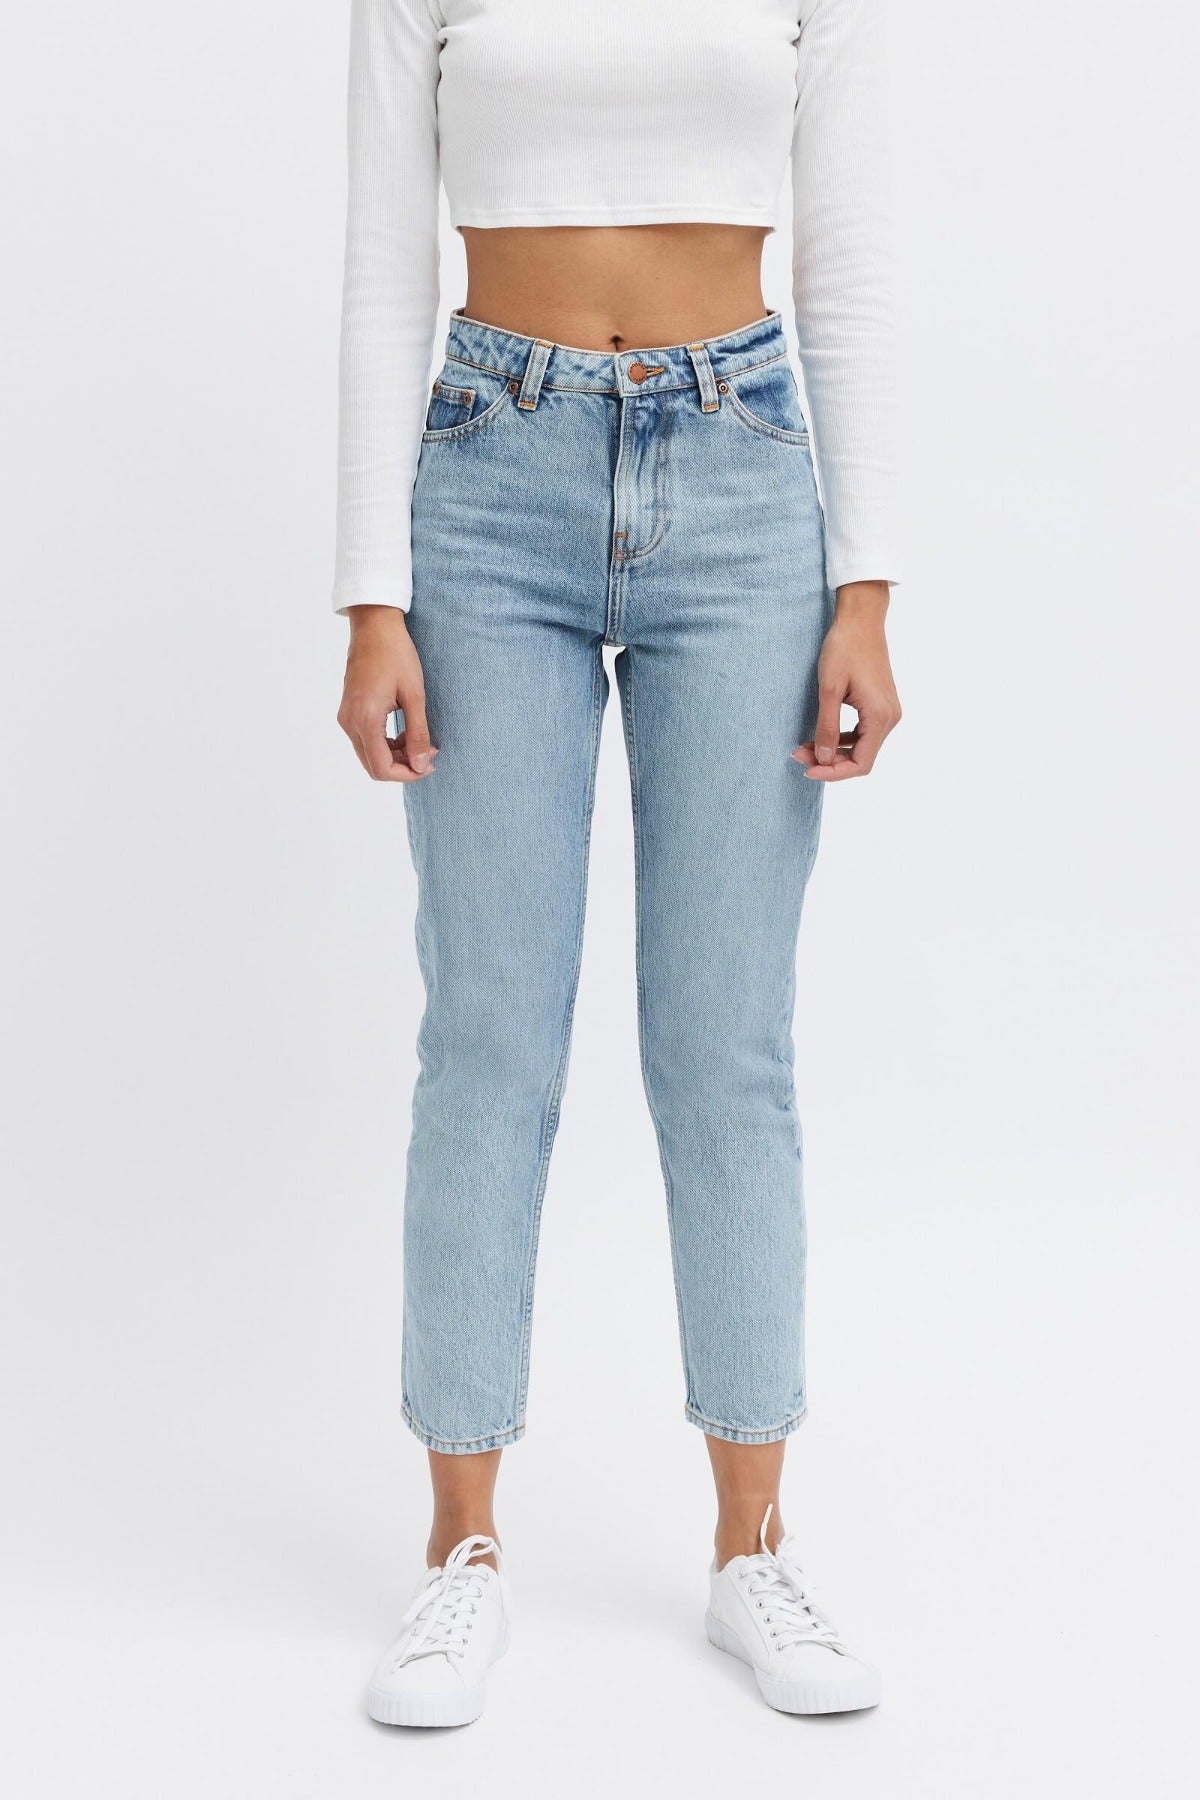 Female cropped jeans. ethical brand 